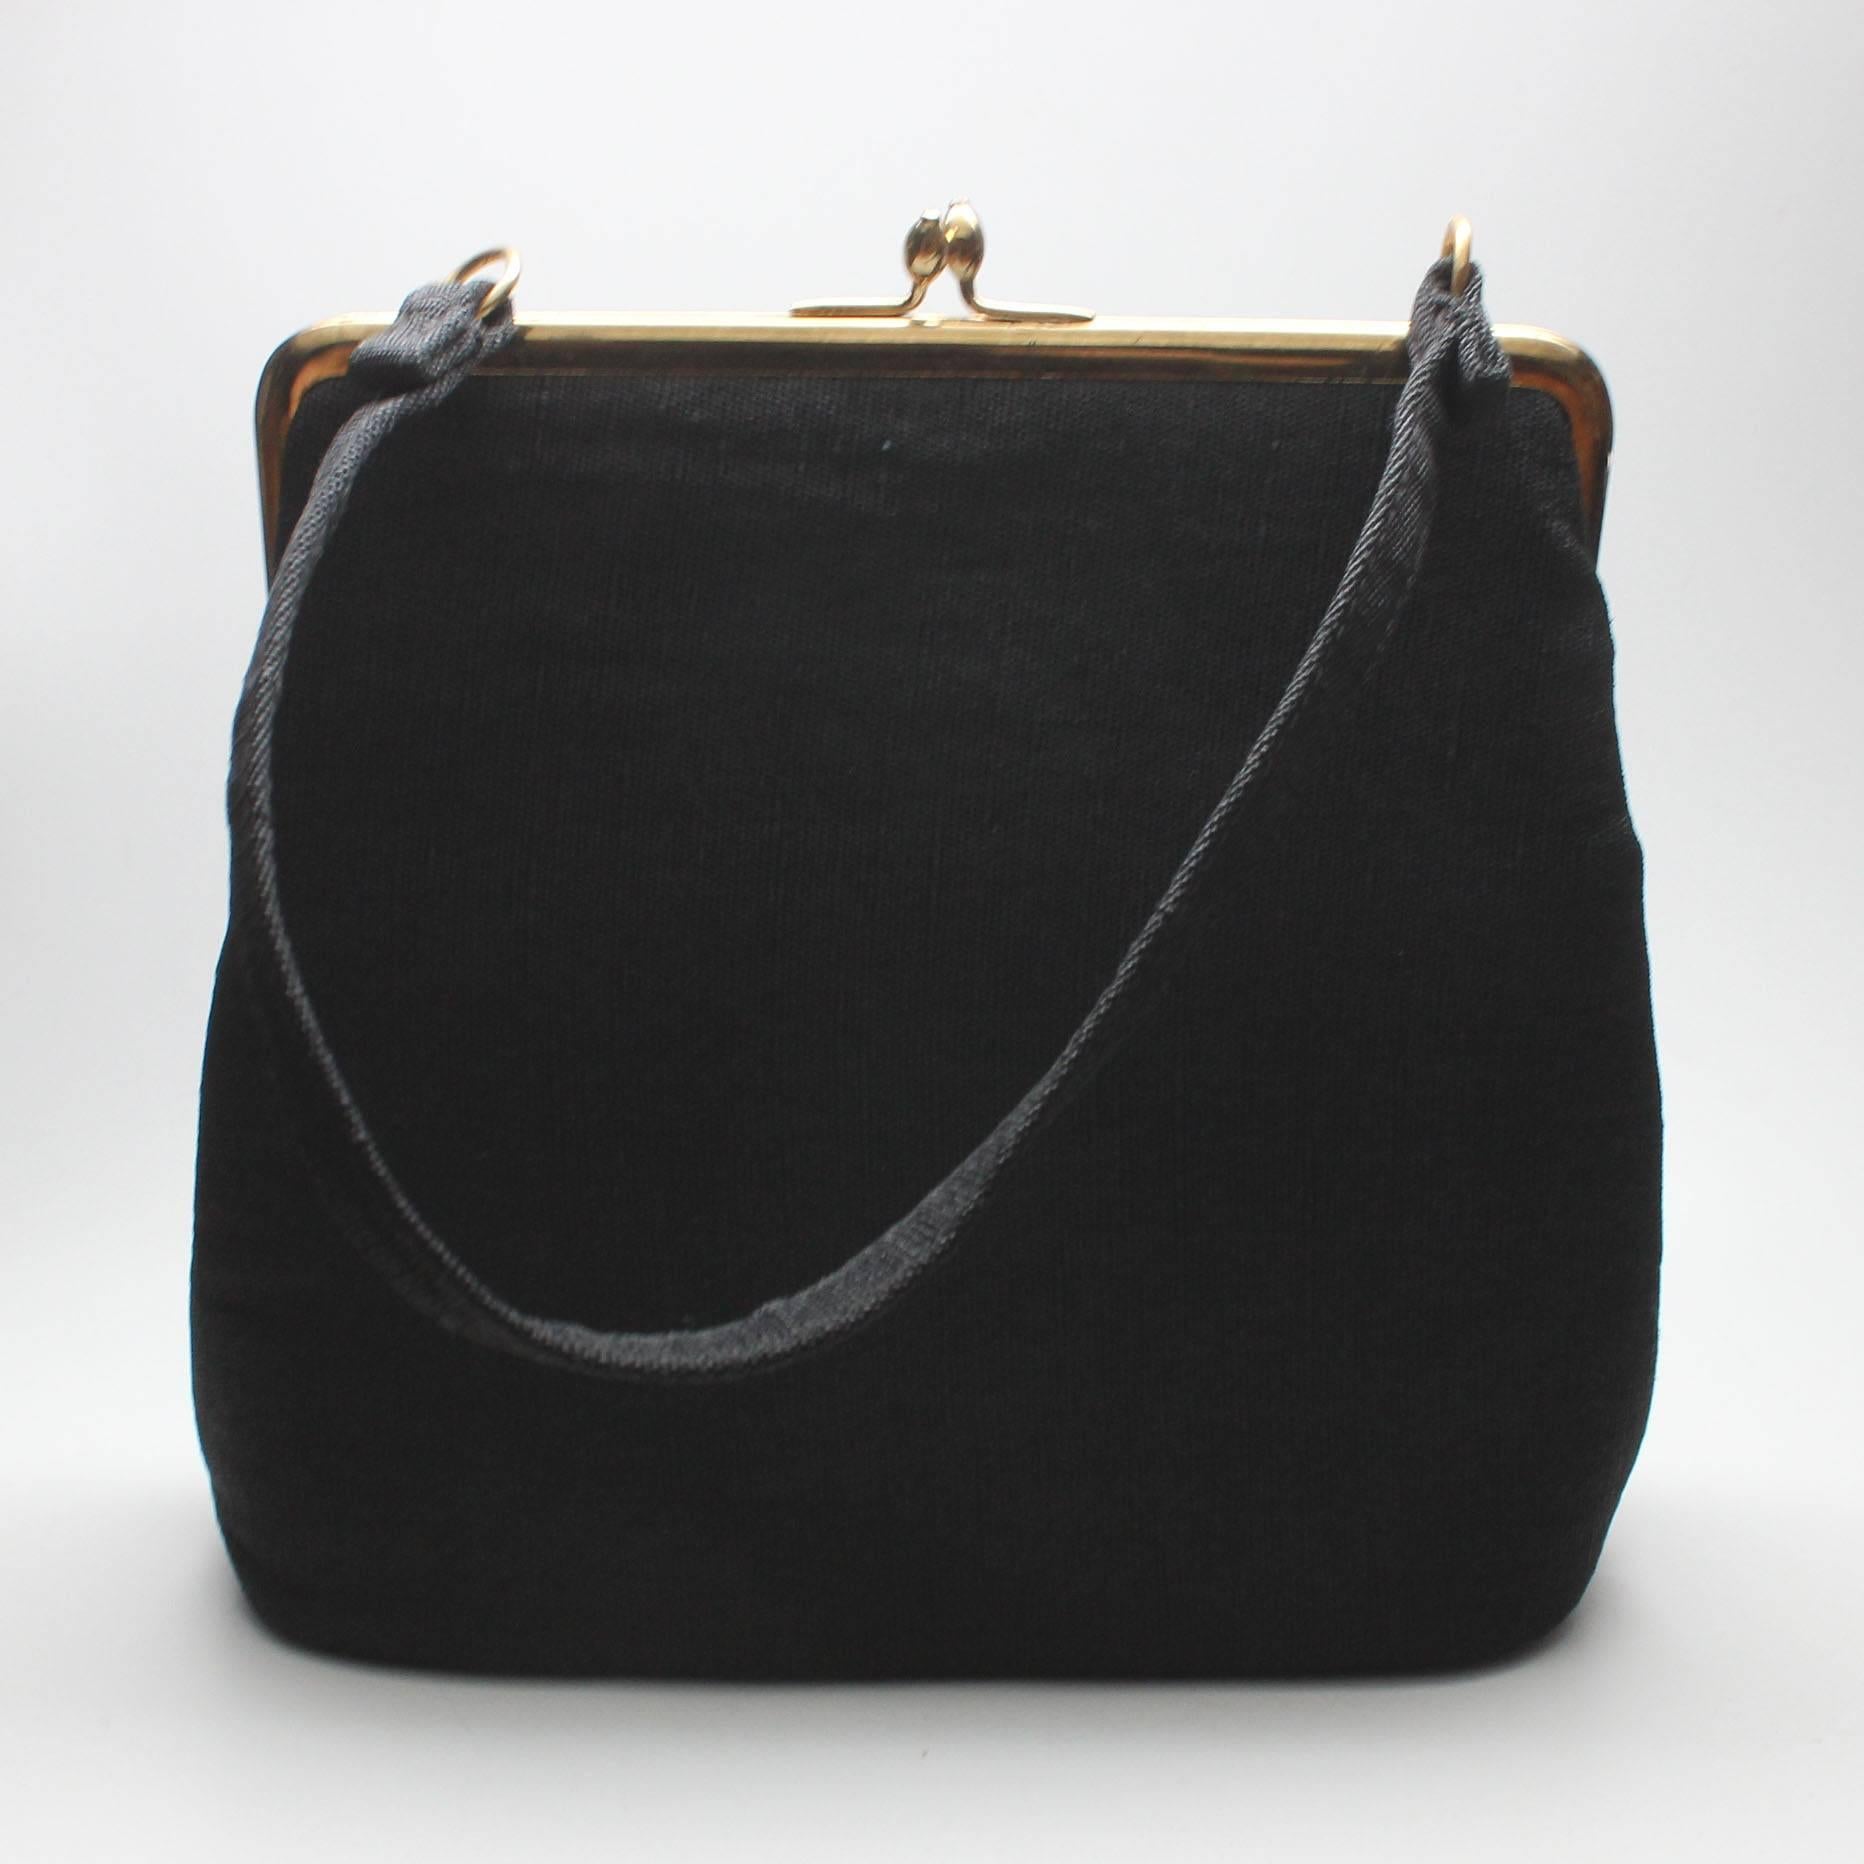 Ingbar & Co manufactured fine handbags from 1903-1966. They were based in Philadelphia with a showroom in NYC. Their designs are collectible because of their beauty and quality craftmanship. This purse dates from the early 1960's. It has a slight